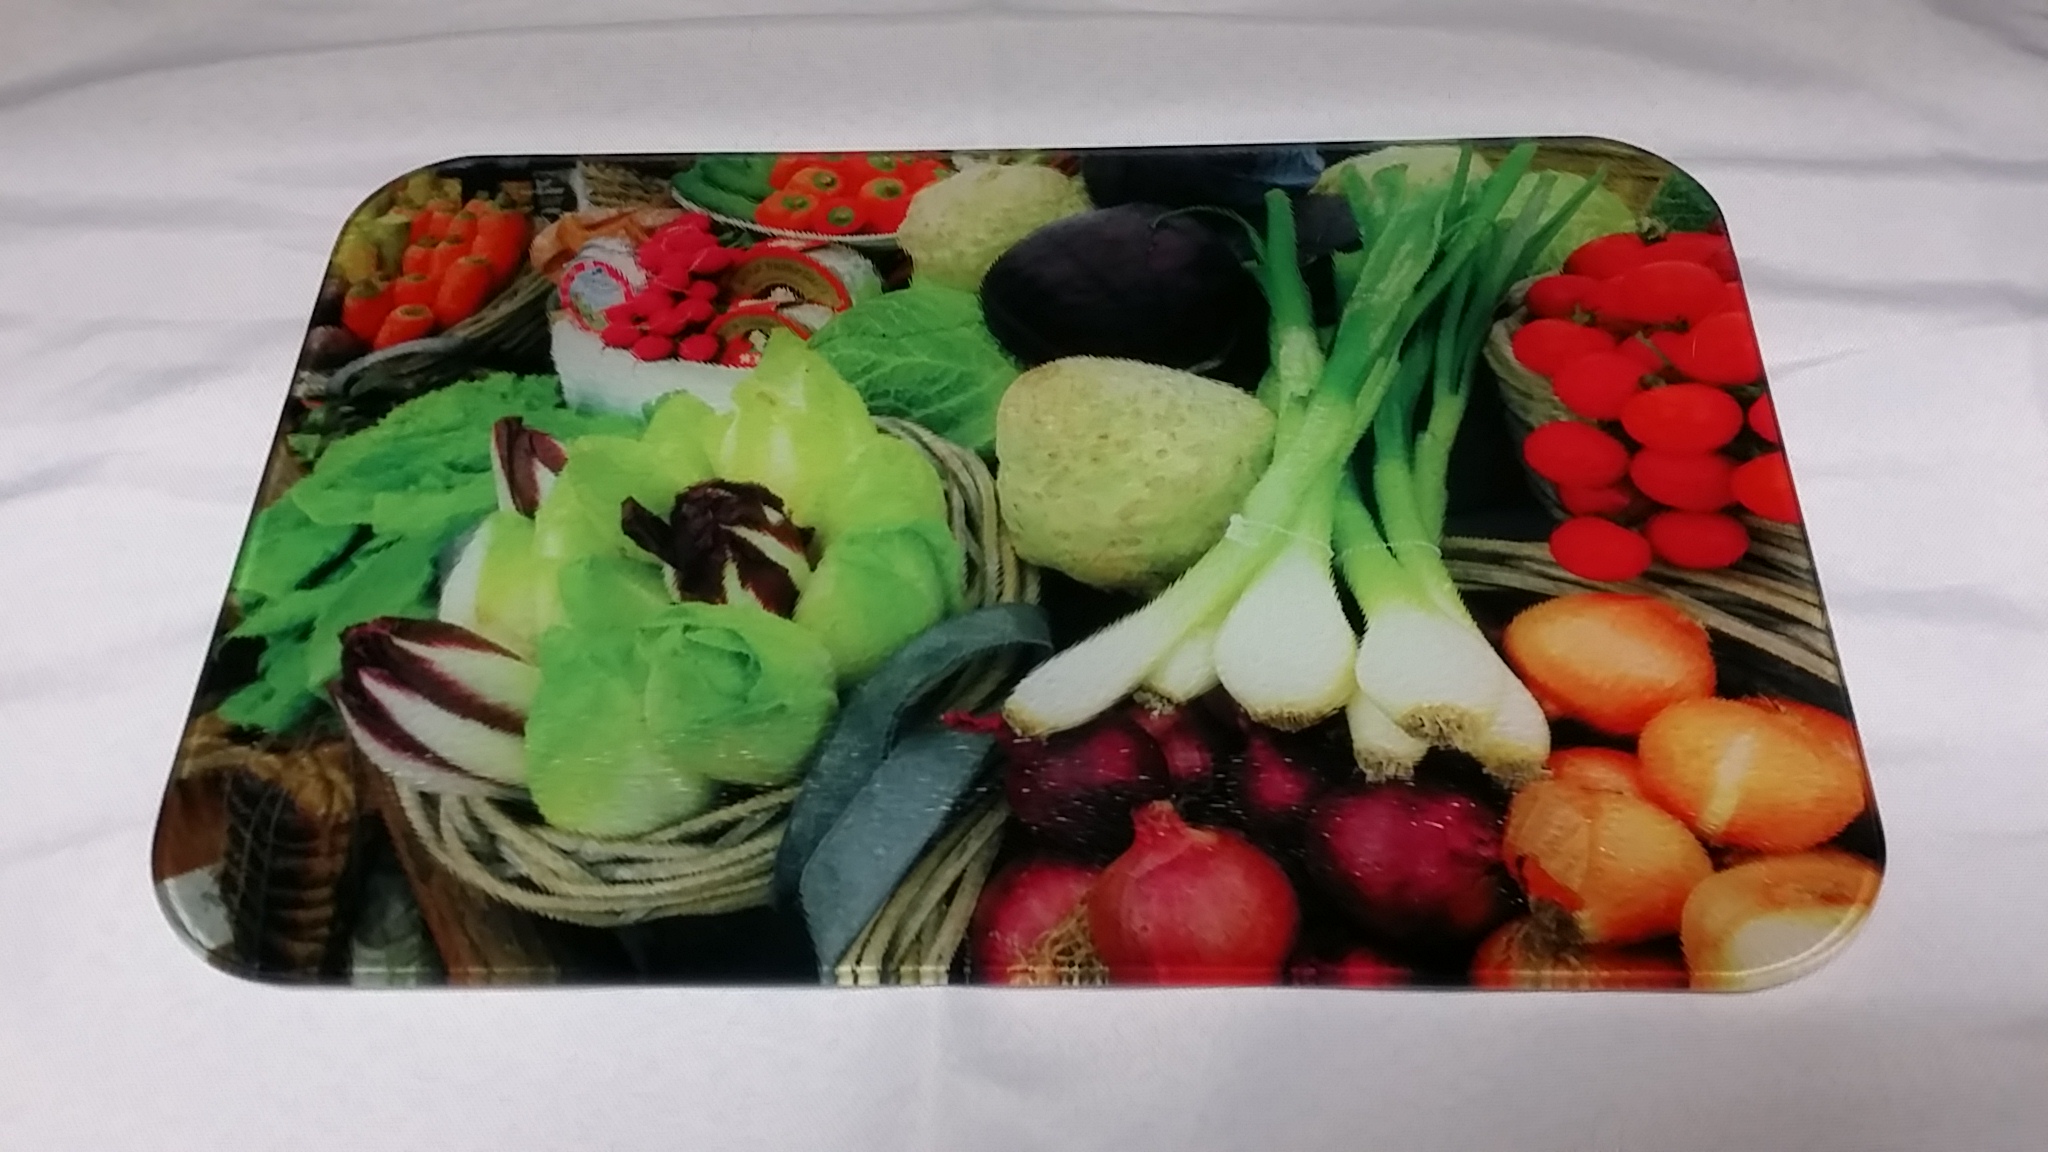 MAINE CUTTING/CHEESE BOARD made with sublimation printing